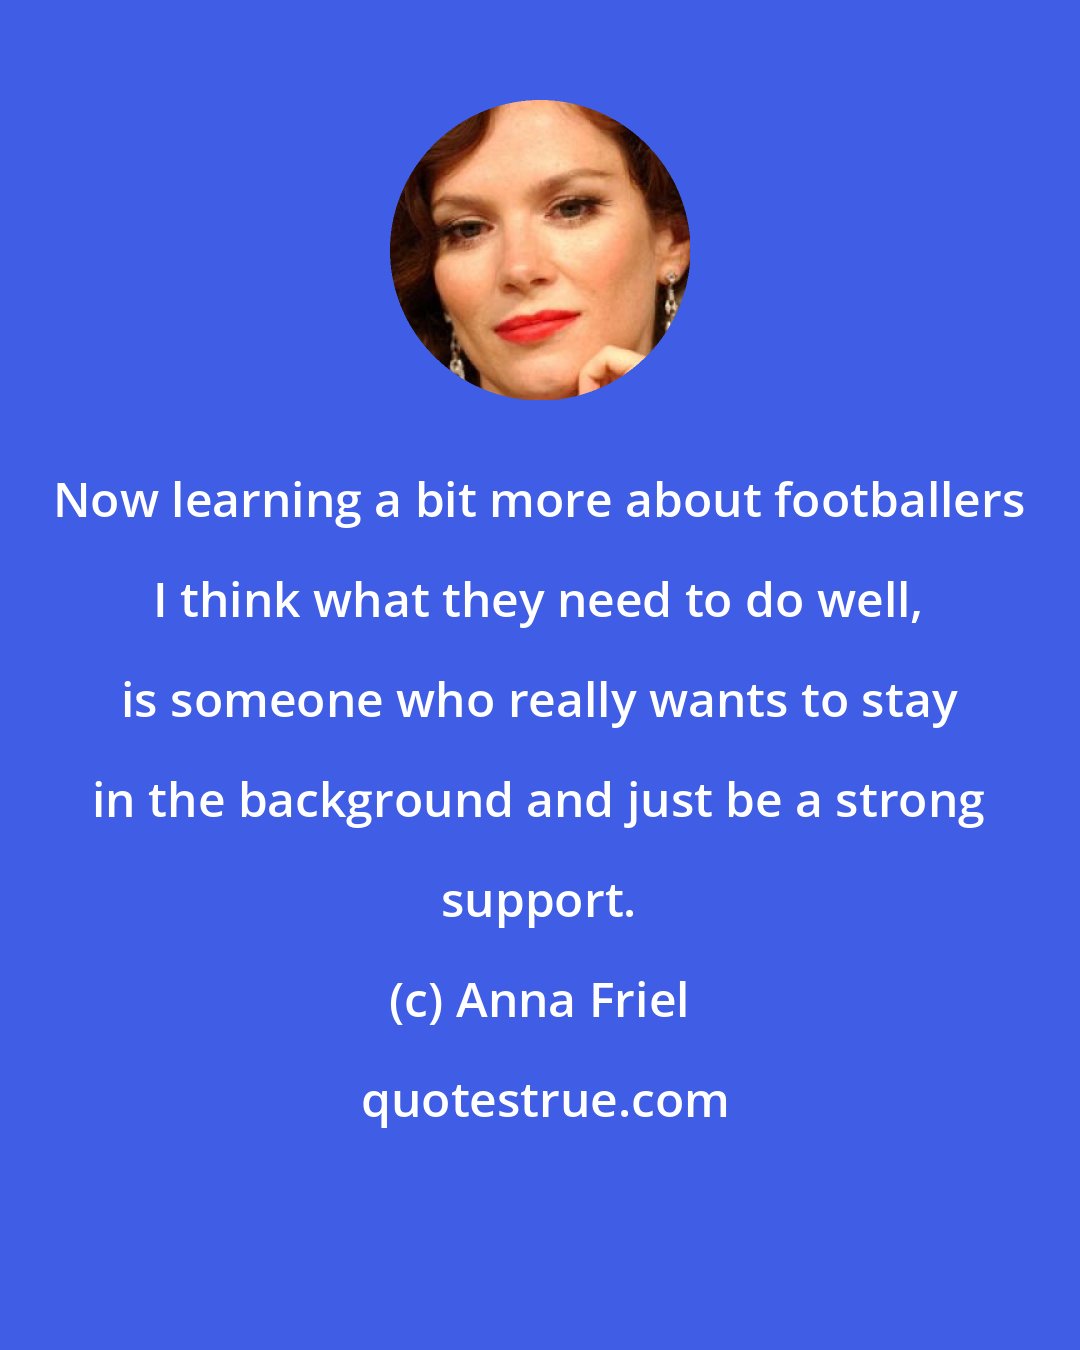 Anna Friel: Now learning a bit more about footballers I think what they need to do well, is someone who really wants to stay in the background and just be a strong support.